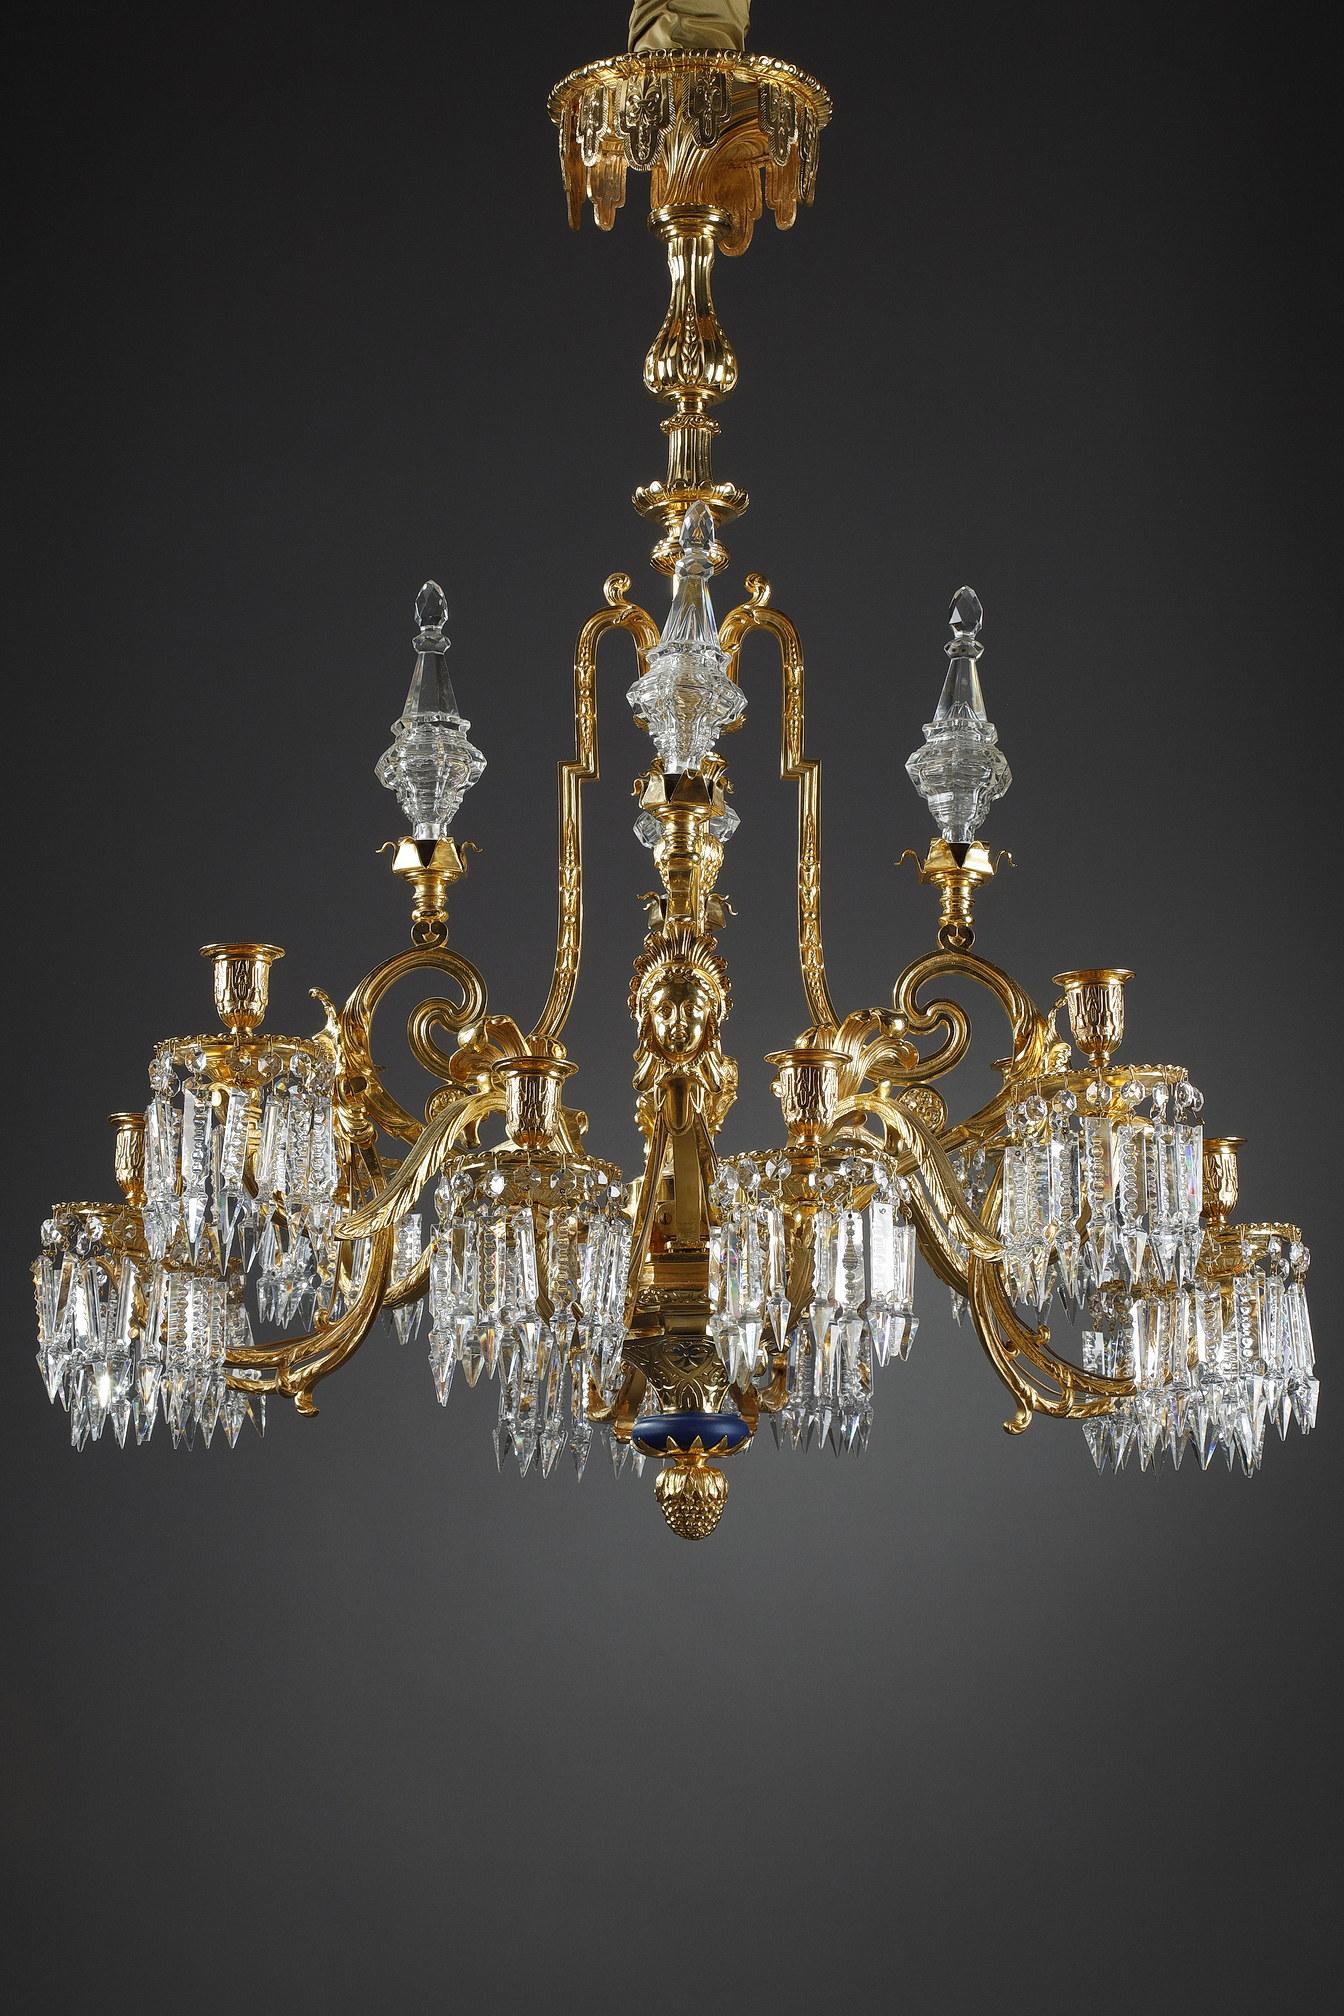 A large ormolu chandelier with twelve lights. The central fluted shaft is decorated with seeds, water leaves and a frieze of posts. It holds sinuous branches topped by crystal daggers. The gilt bronze frame is decorated with acanthus leaves, rosette